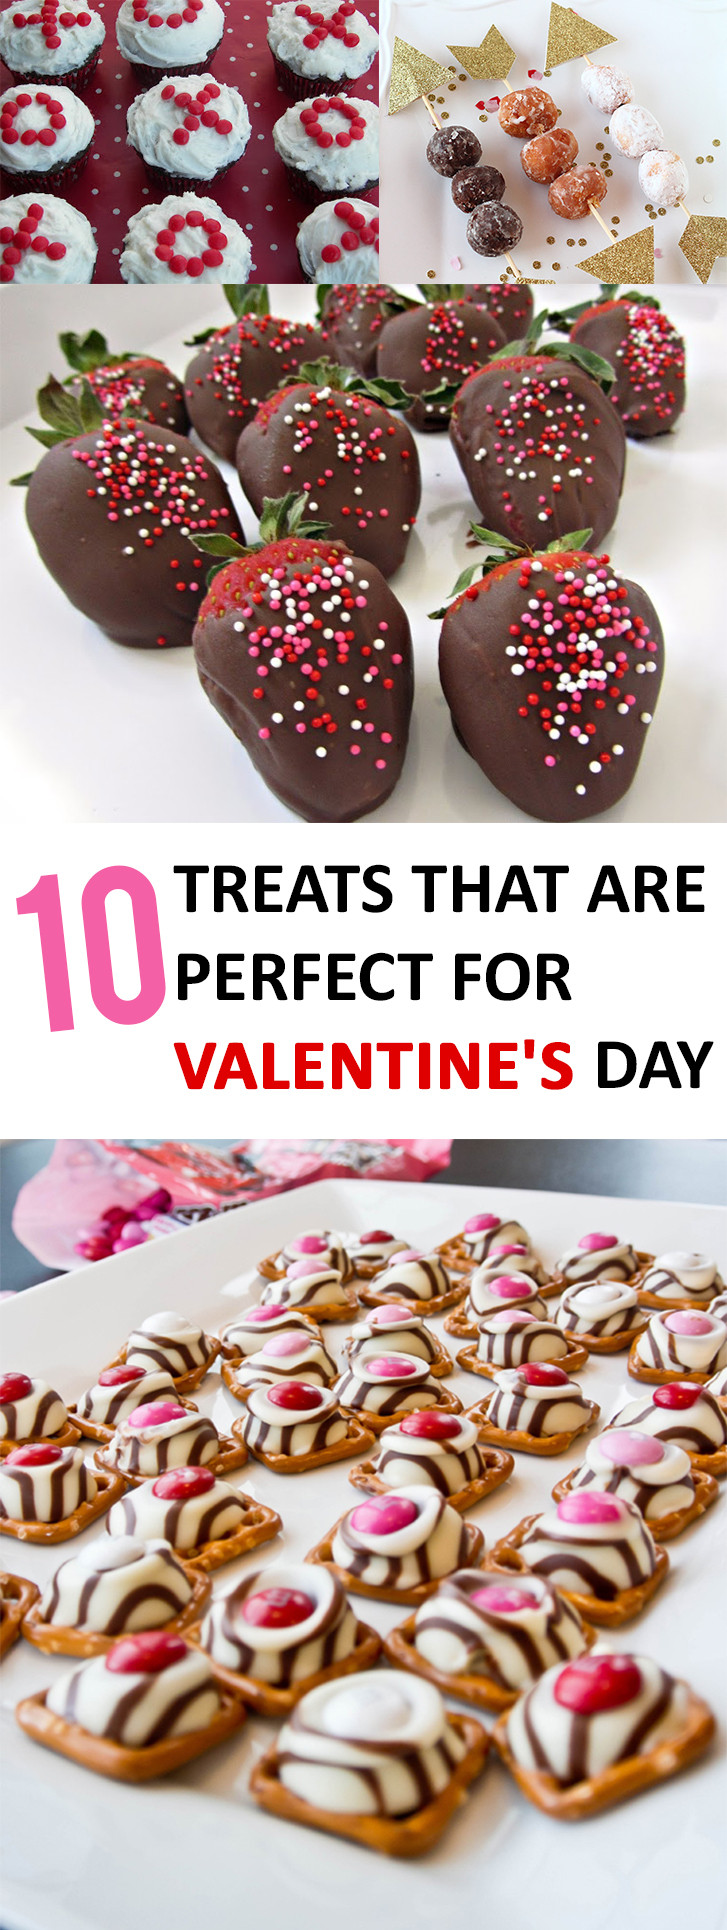 Valentine Day Food Gifts
 10 Treats that are Perfect for Valentine’s Day